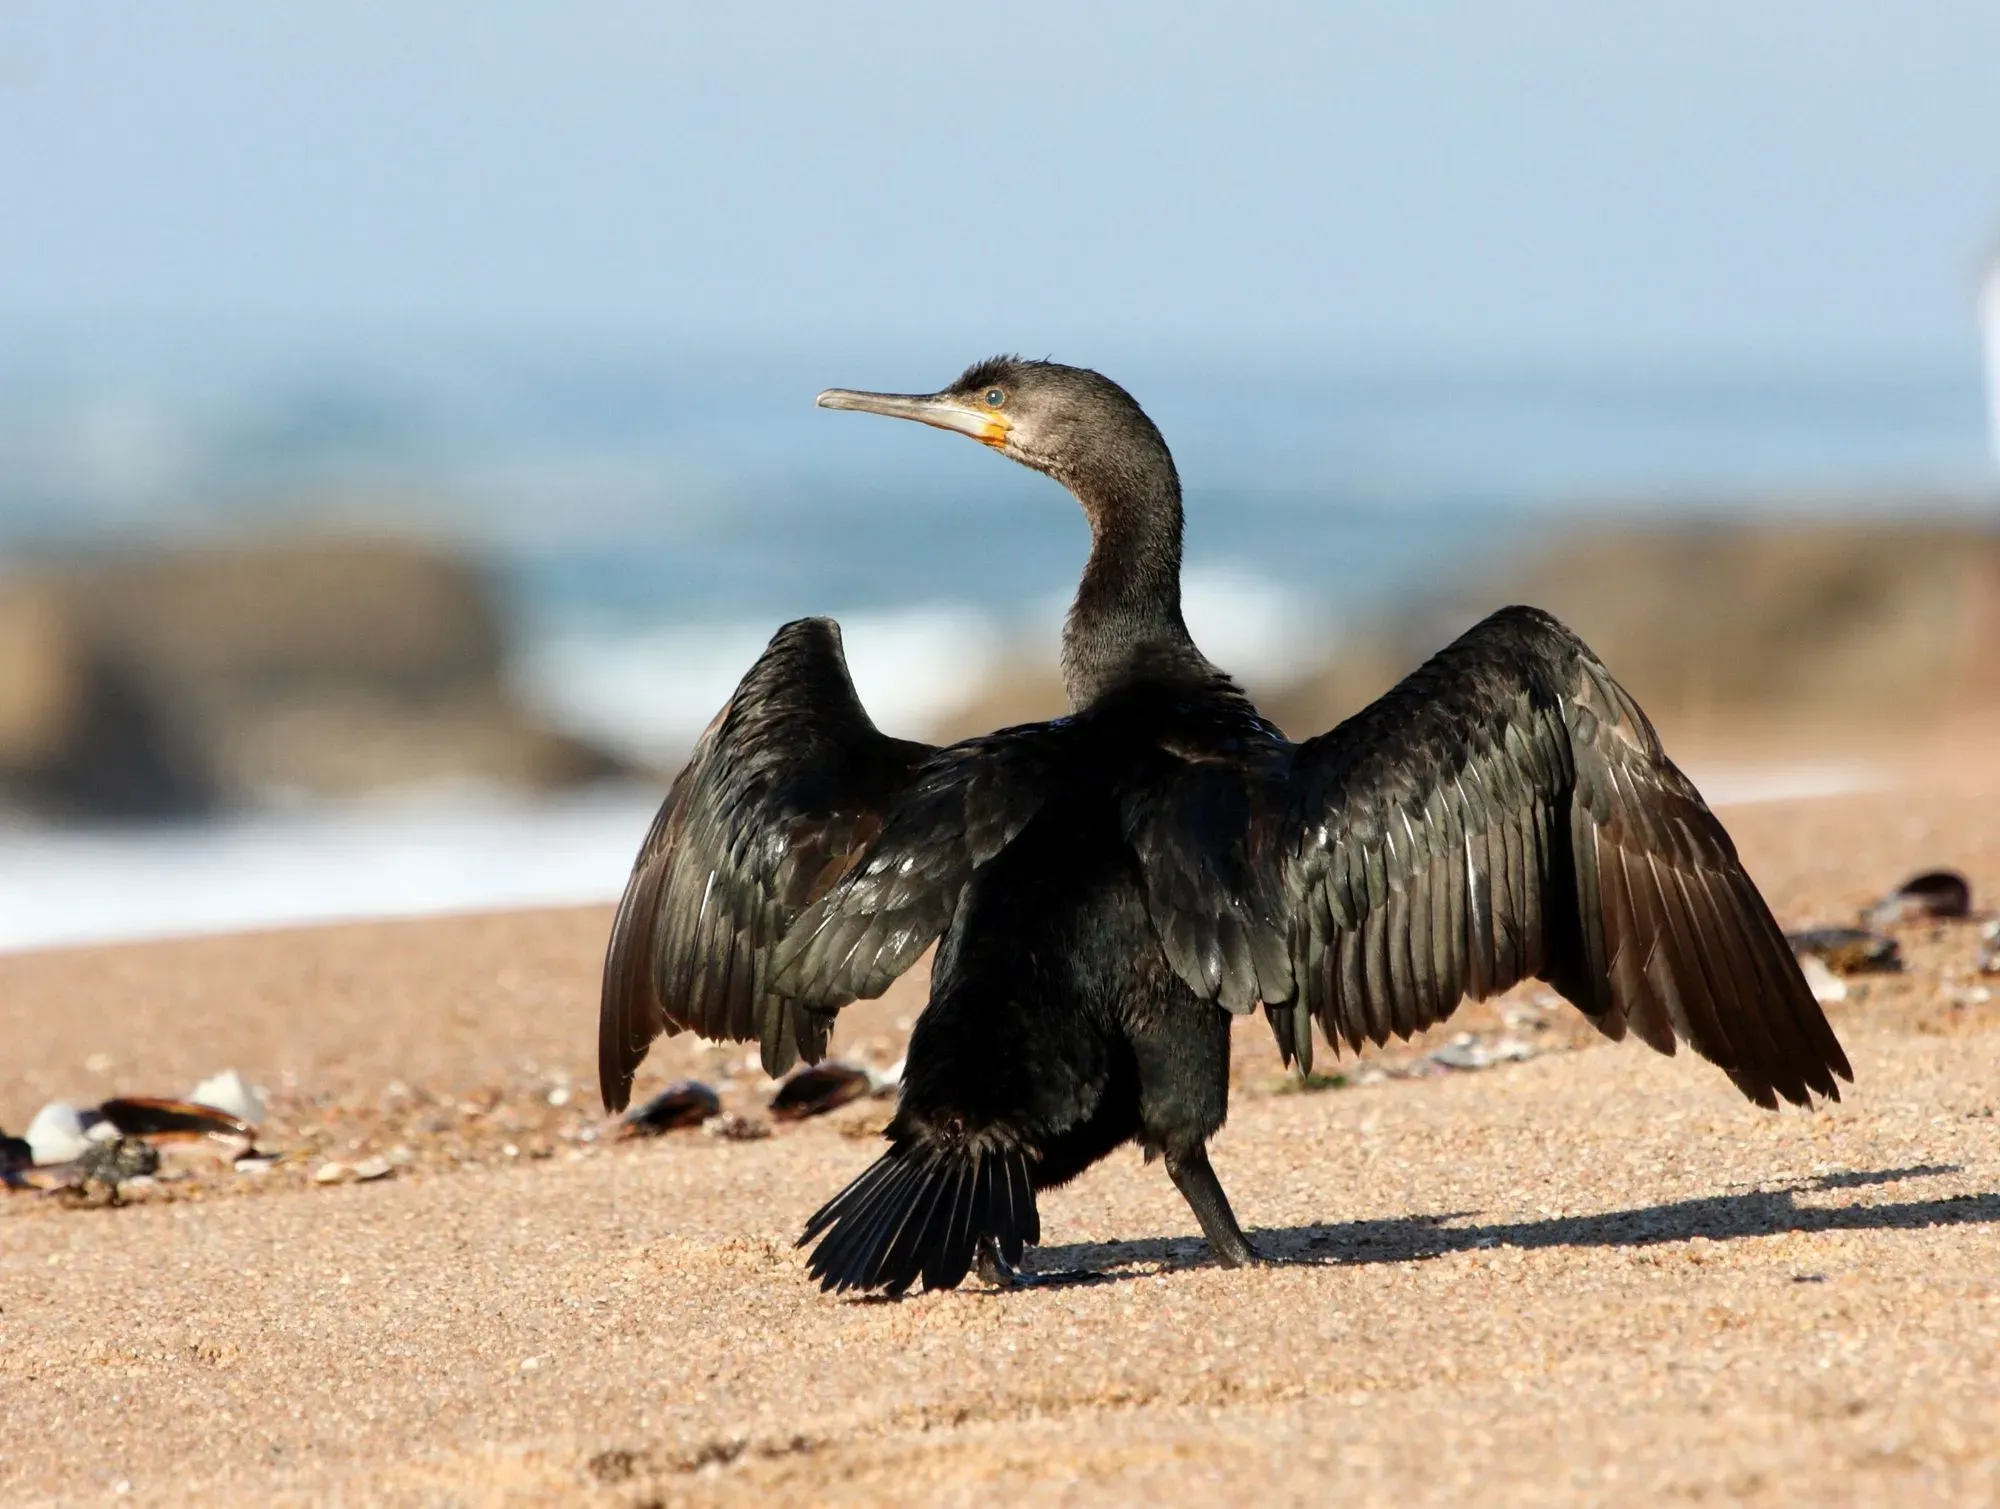 The Cape cormorant builds its nest with plant materials.